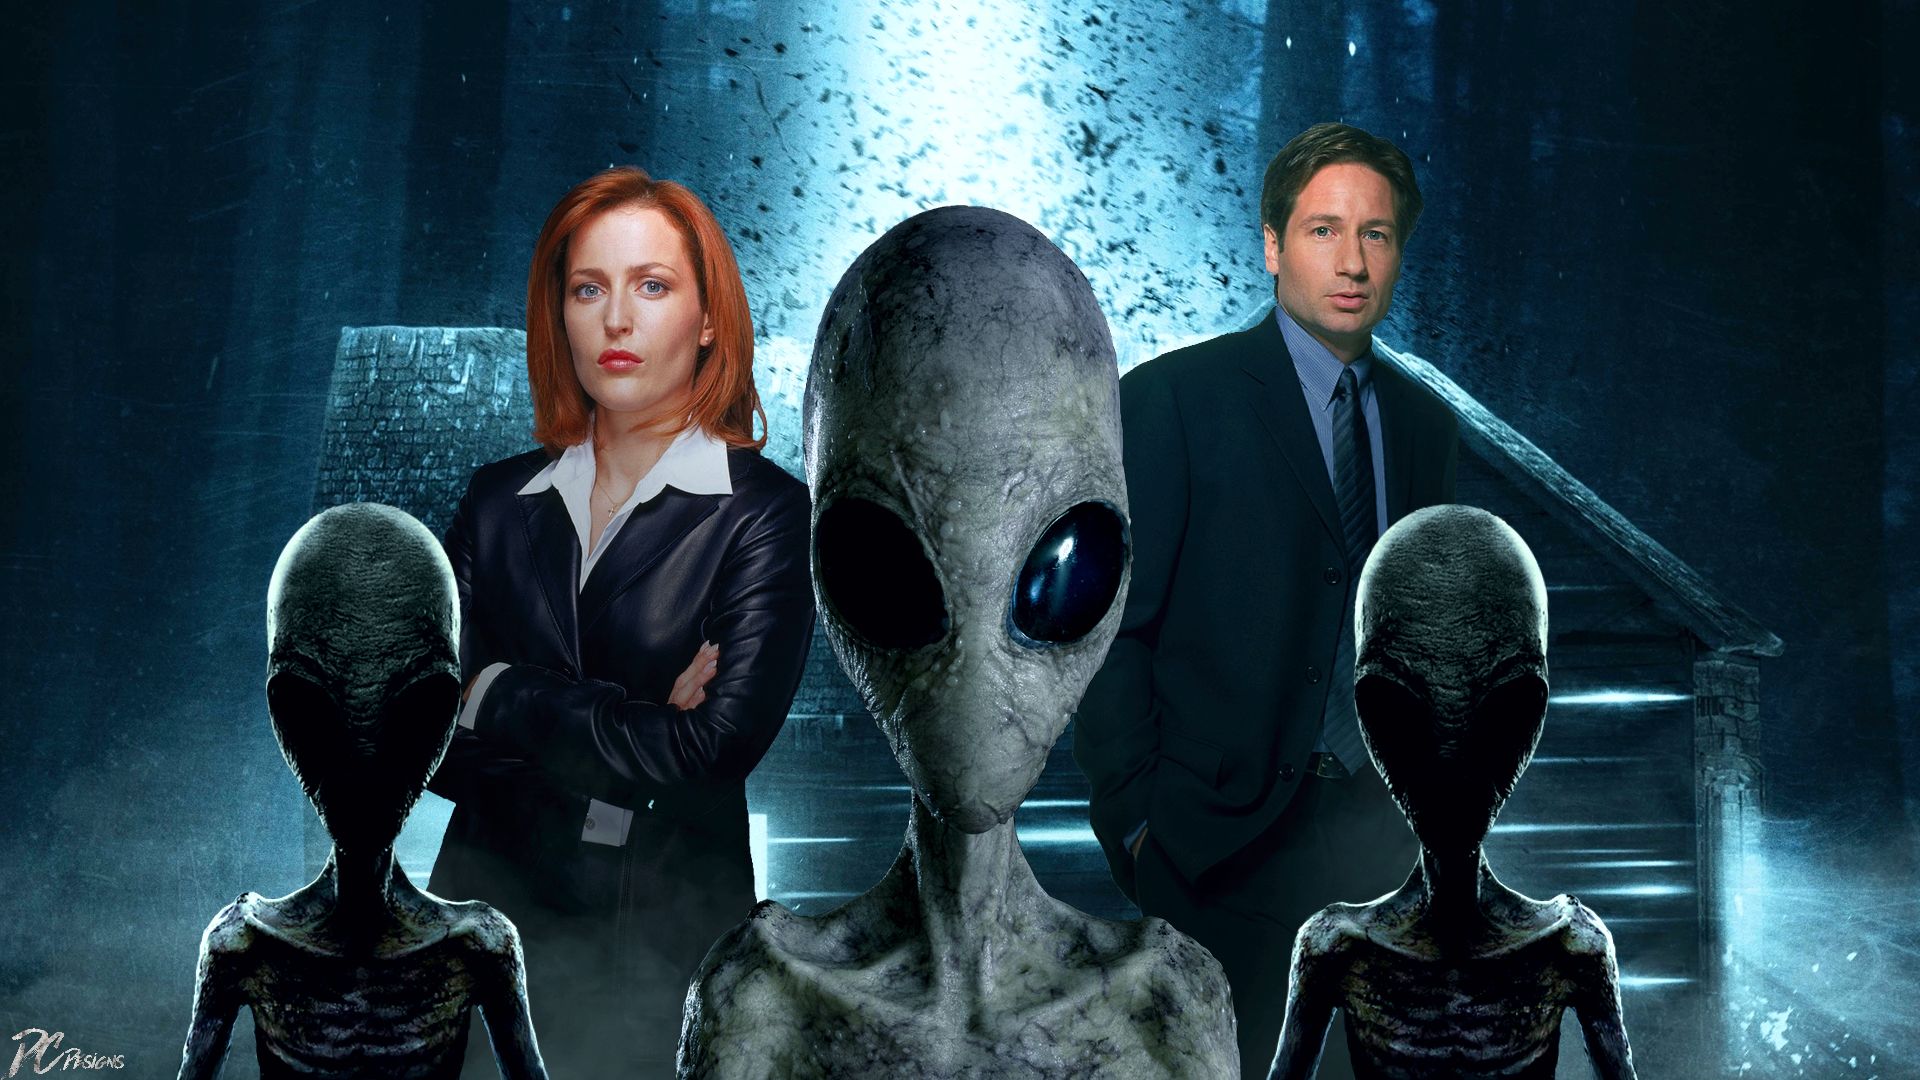 david duchovny, tv show, the x files, dana scully, extraterrestrial, fox mulder, gillian anderson